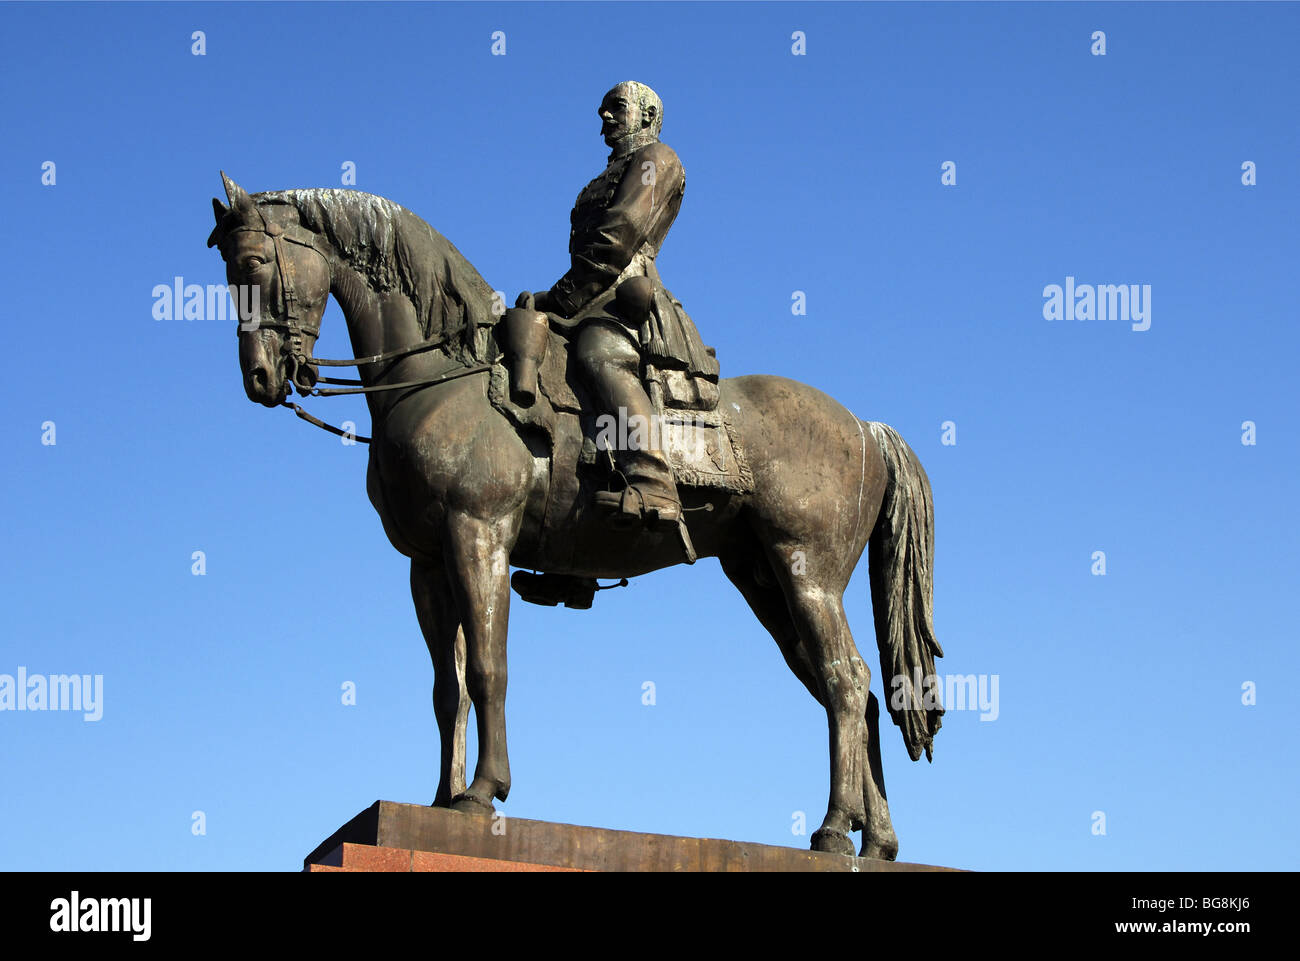 Görgey, Artur (1818-1916). Hungarian army officer and hero of the Hungarian Revolution of 1848-1849. Stock Photo